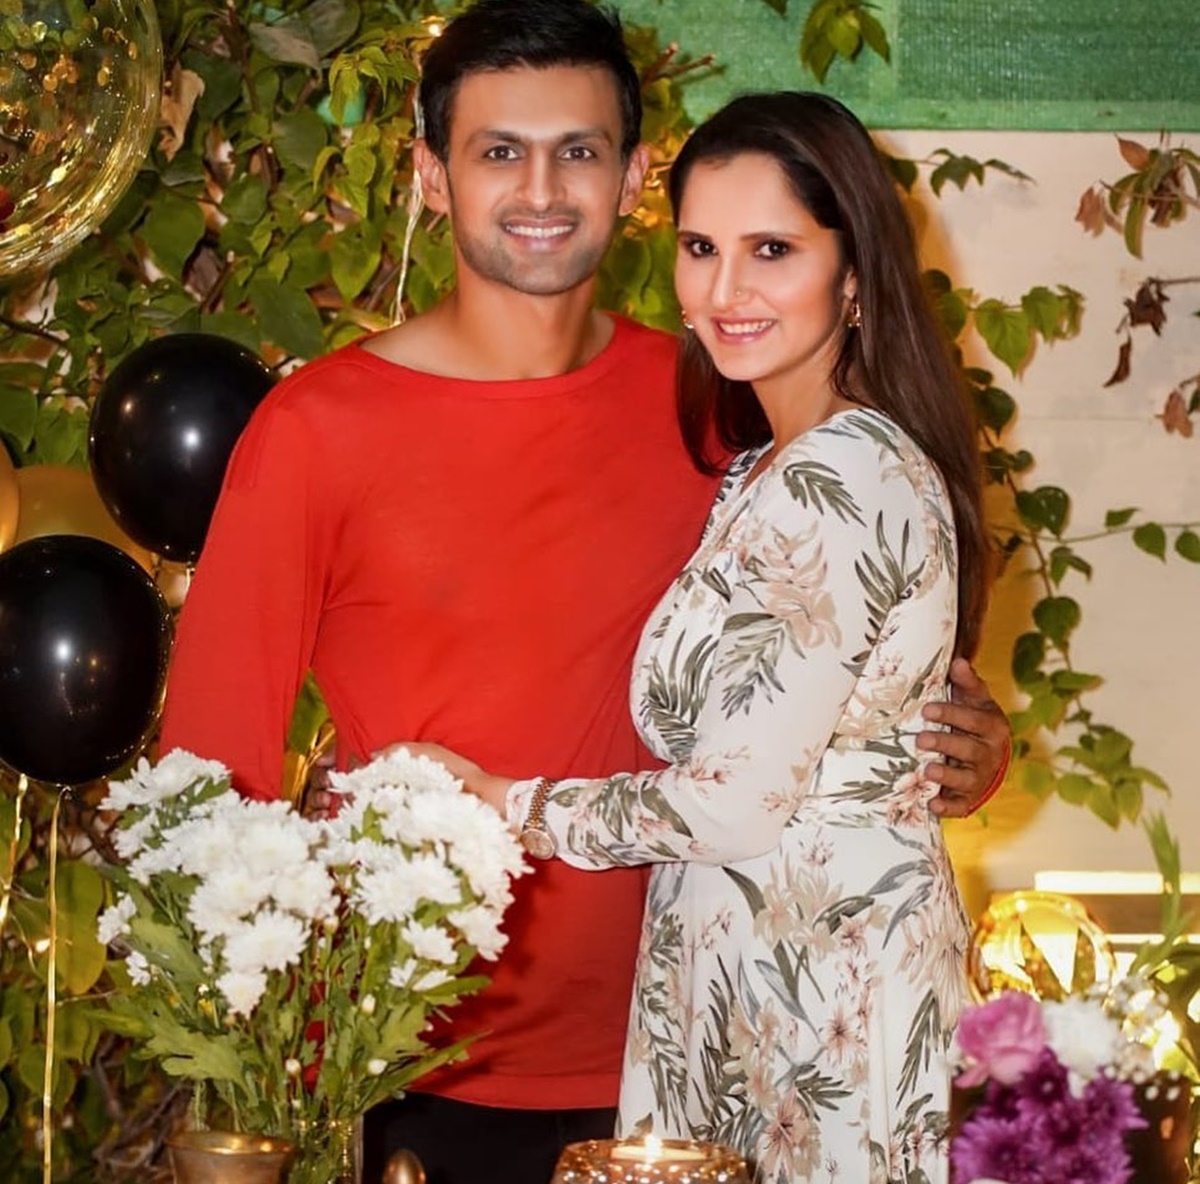  Shoaib Malik and Sania Mirza, who recently went their separate ways, were married in 2010 in Hyderabad